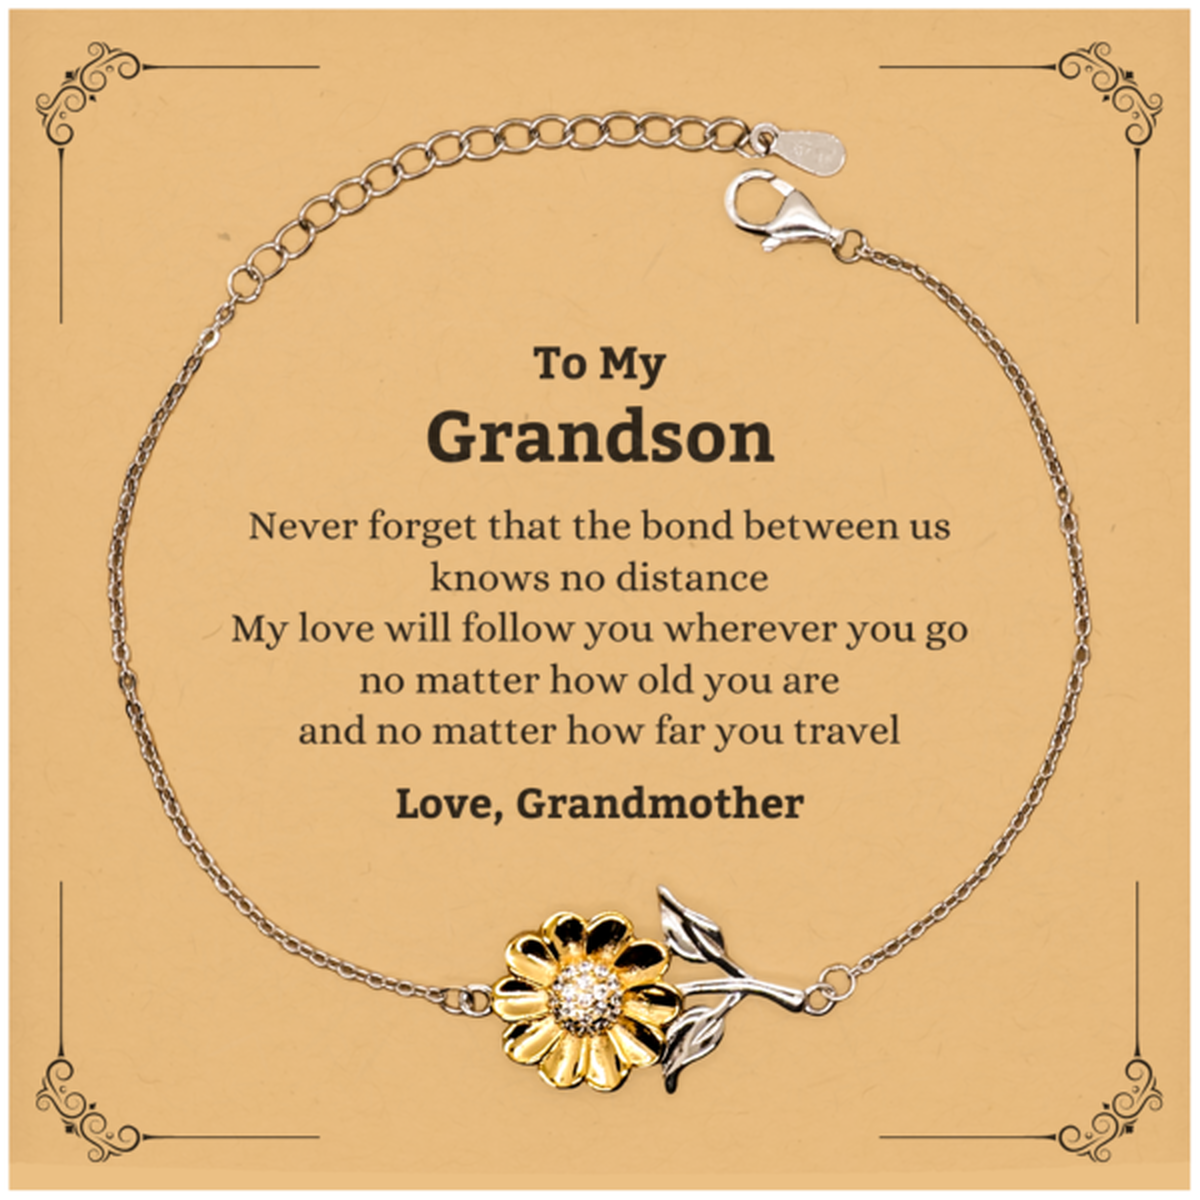 Grandson Birthday Gifts from Grandmother, Adjustable Sunflower Bracelet for Grandson Christmas Graduation Unique Gifts Grandson Never forget that the bond between us knows no distance. Love, Grandmother